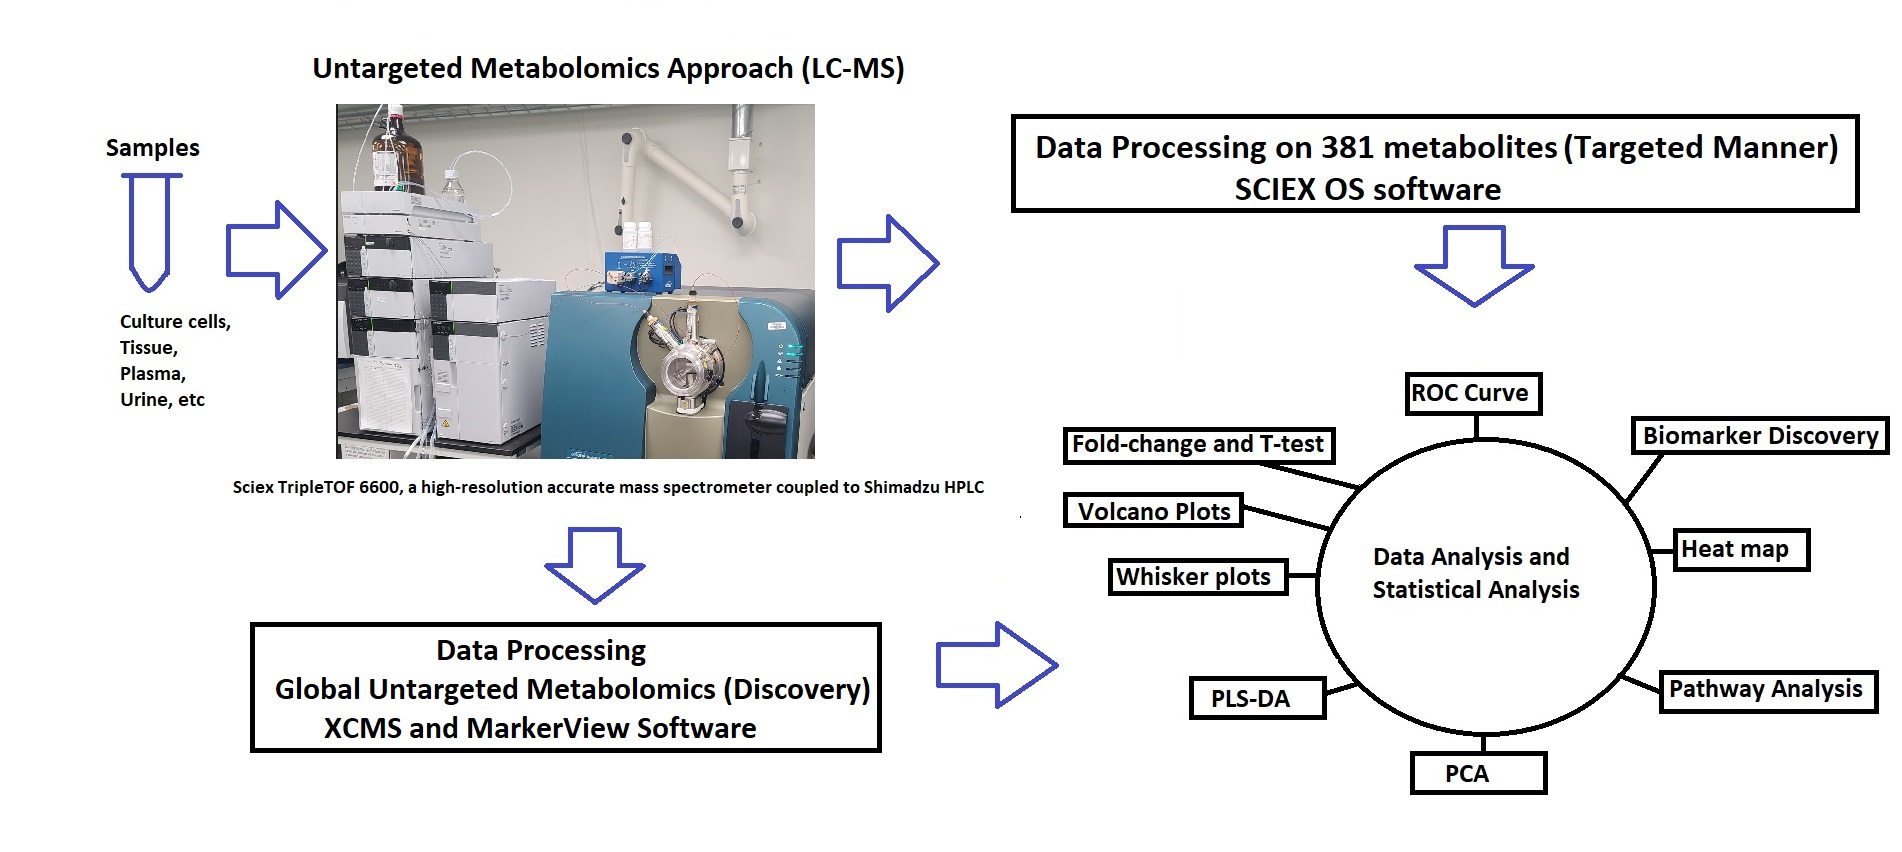 Diagram outlining the untargeted metabolomics workflow from sample to data processing to ROC curve analysis